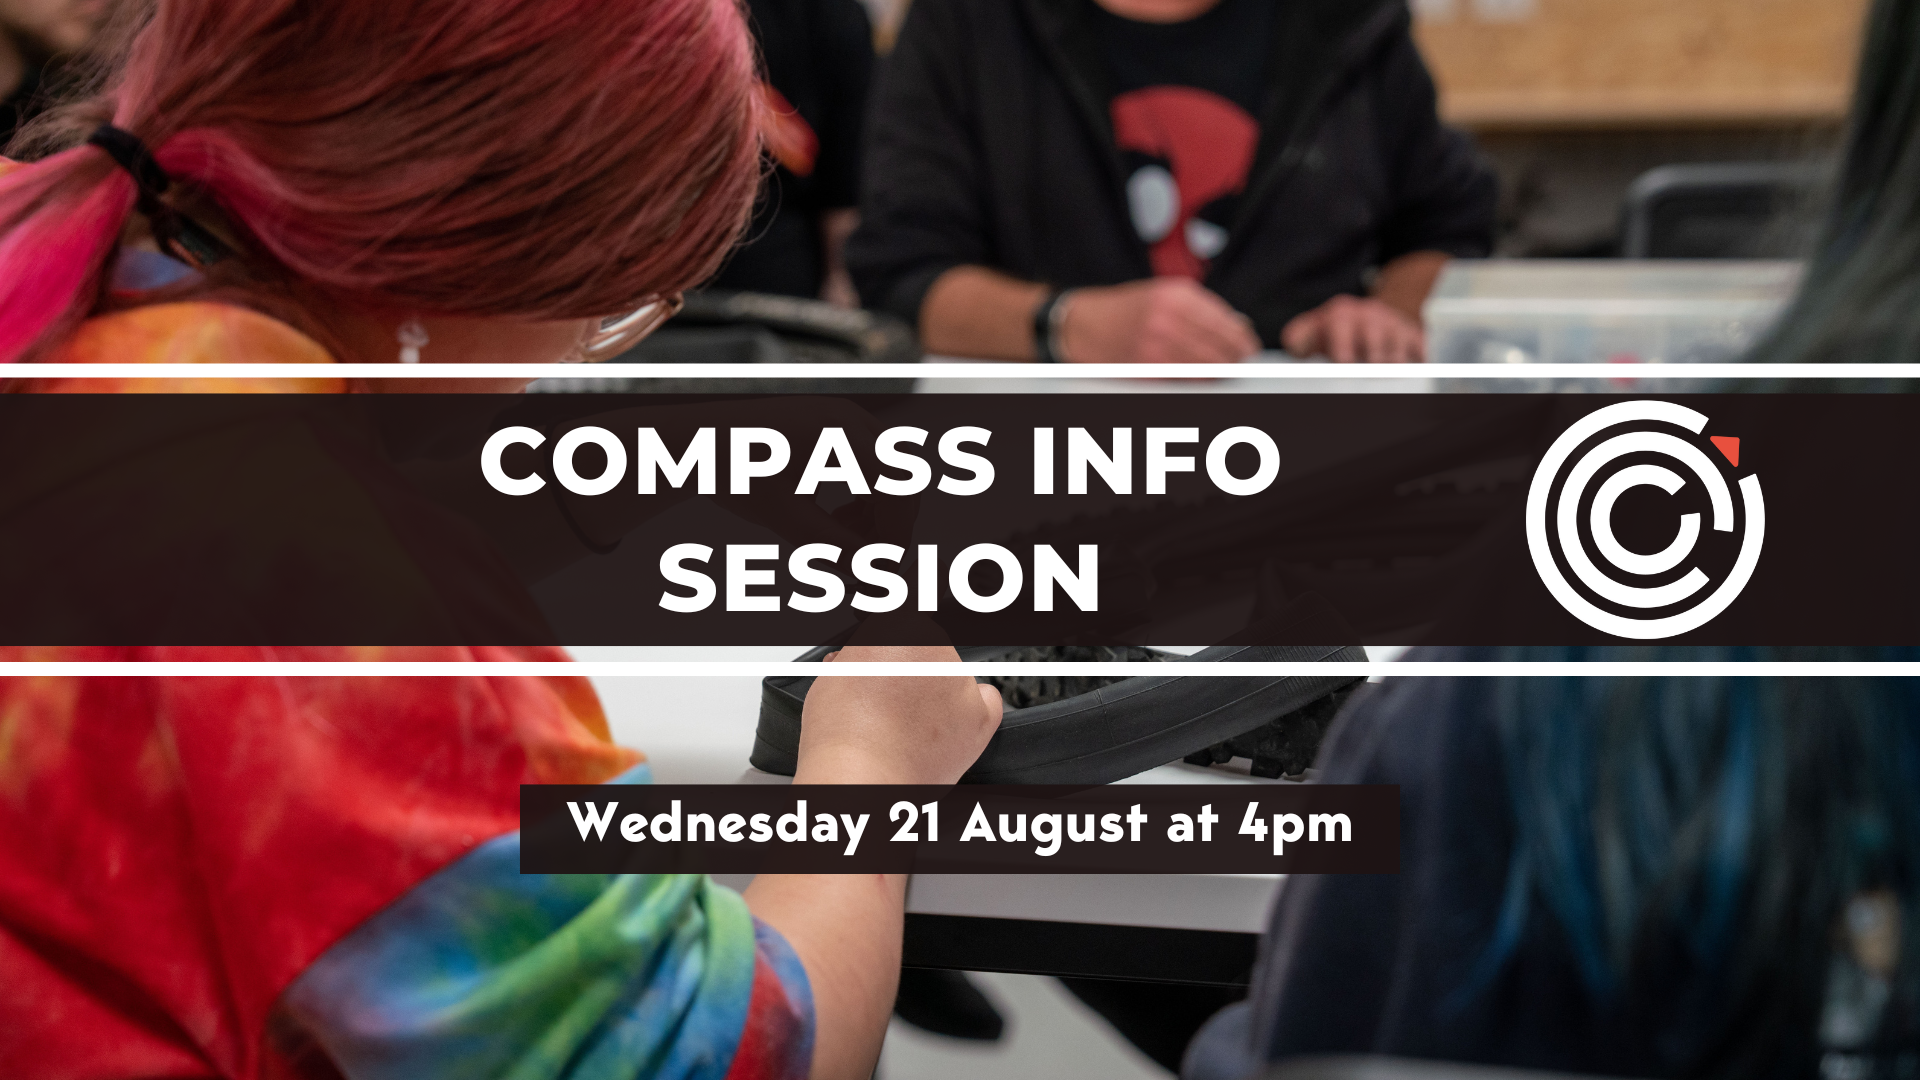 Compass Info Session - Wednesday 21 August